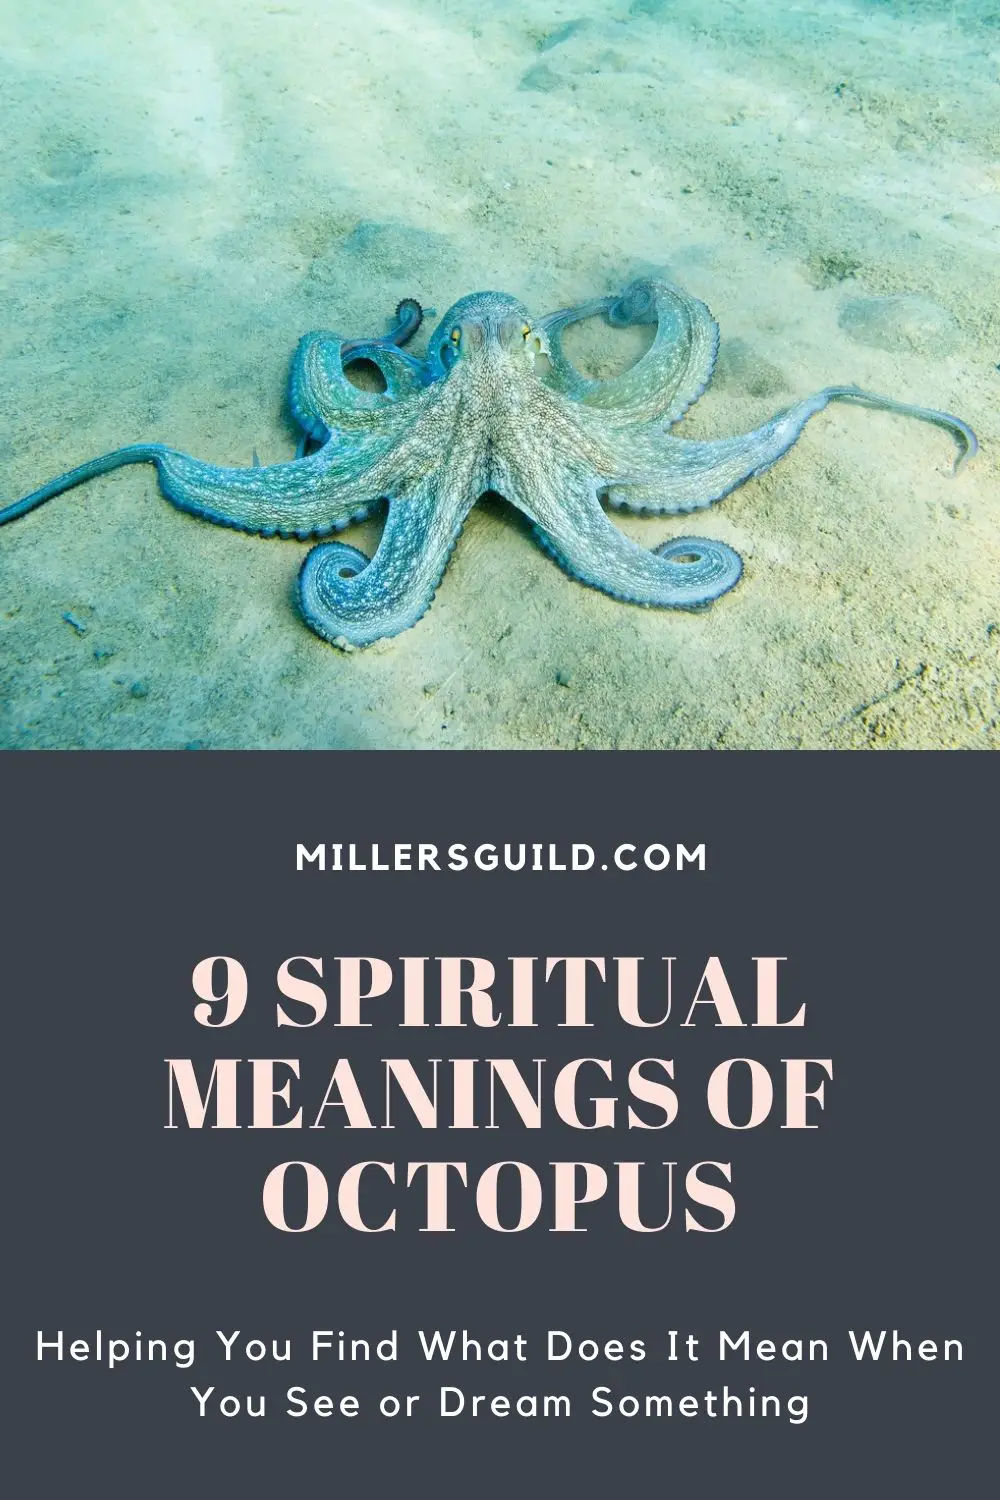 What Is The Spiritual Meaning Of An Octopus?